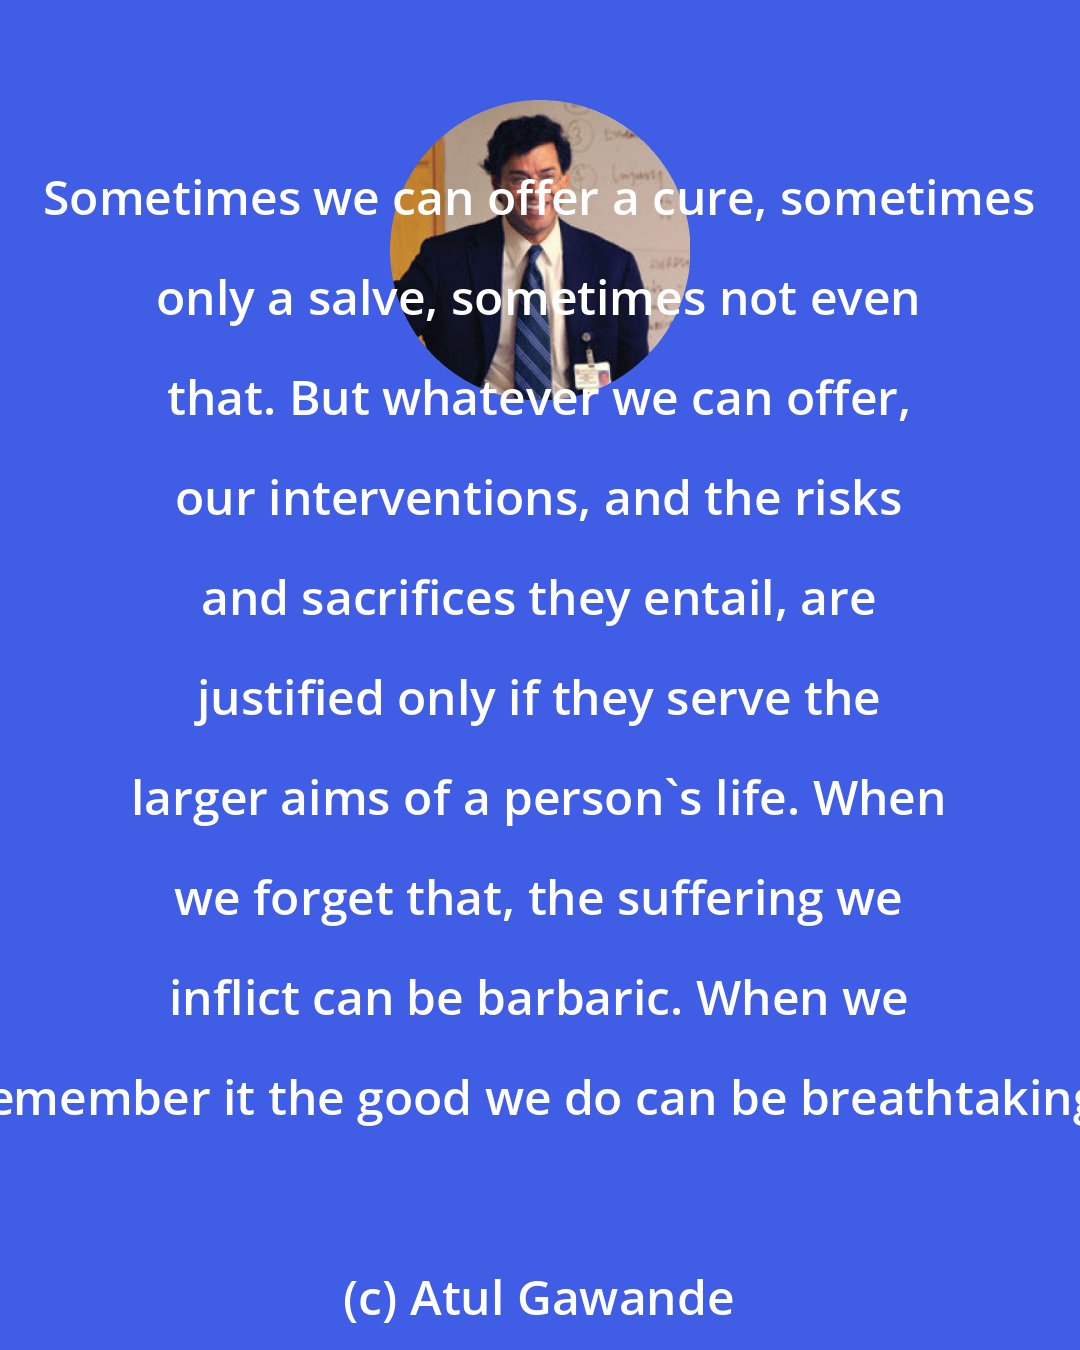 Atul Gawande: Sometimes we can offer a cure, sometimes only a salve, sometimes not even that. But whatever we can offer, our interventions, and the risks and sacrifices they entail, are justified only if they serve the larger aims of a person's life. When we forget that, the suffering we inflict can be barbaric. When we remember it the good we do can be breathtaking.